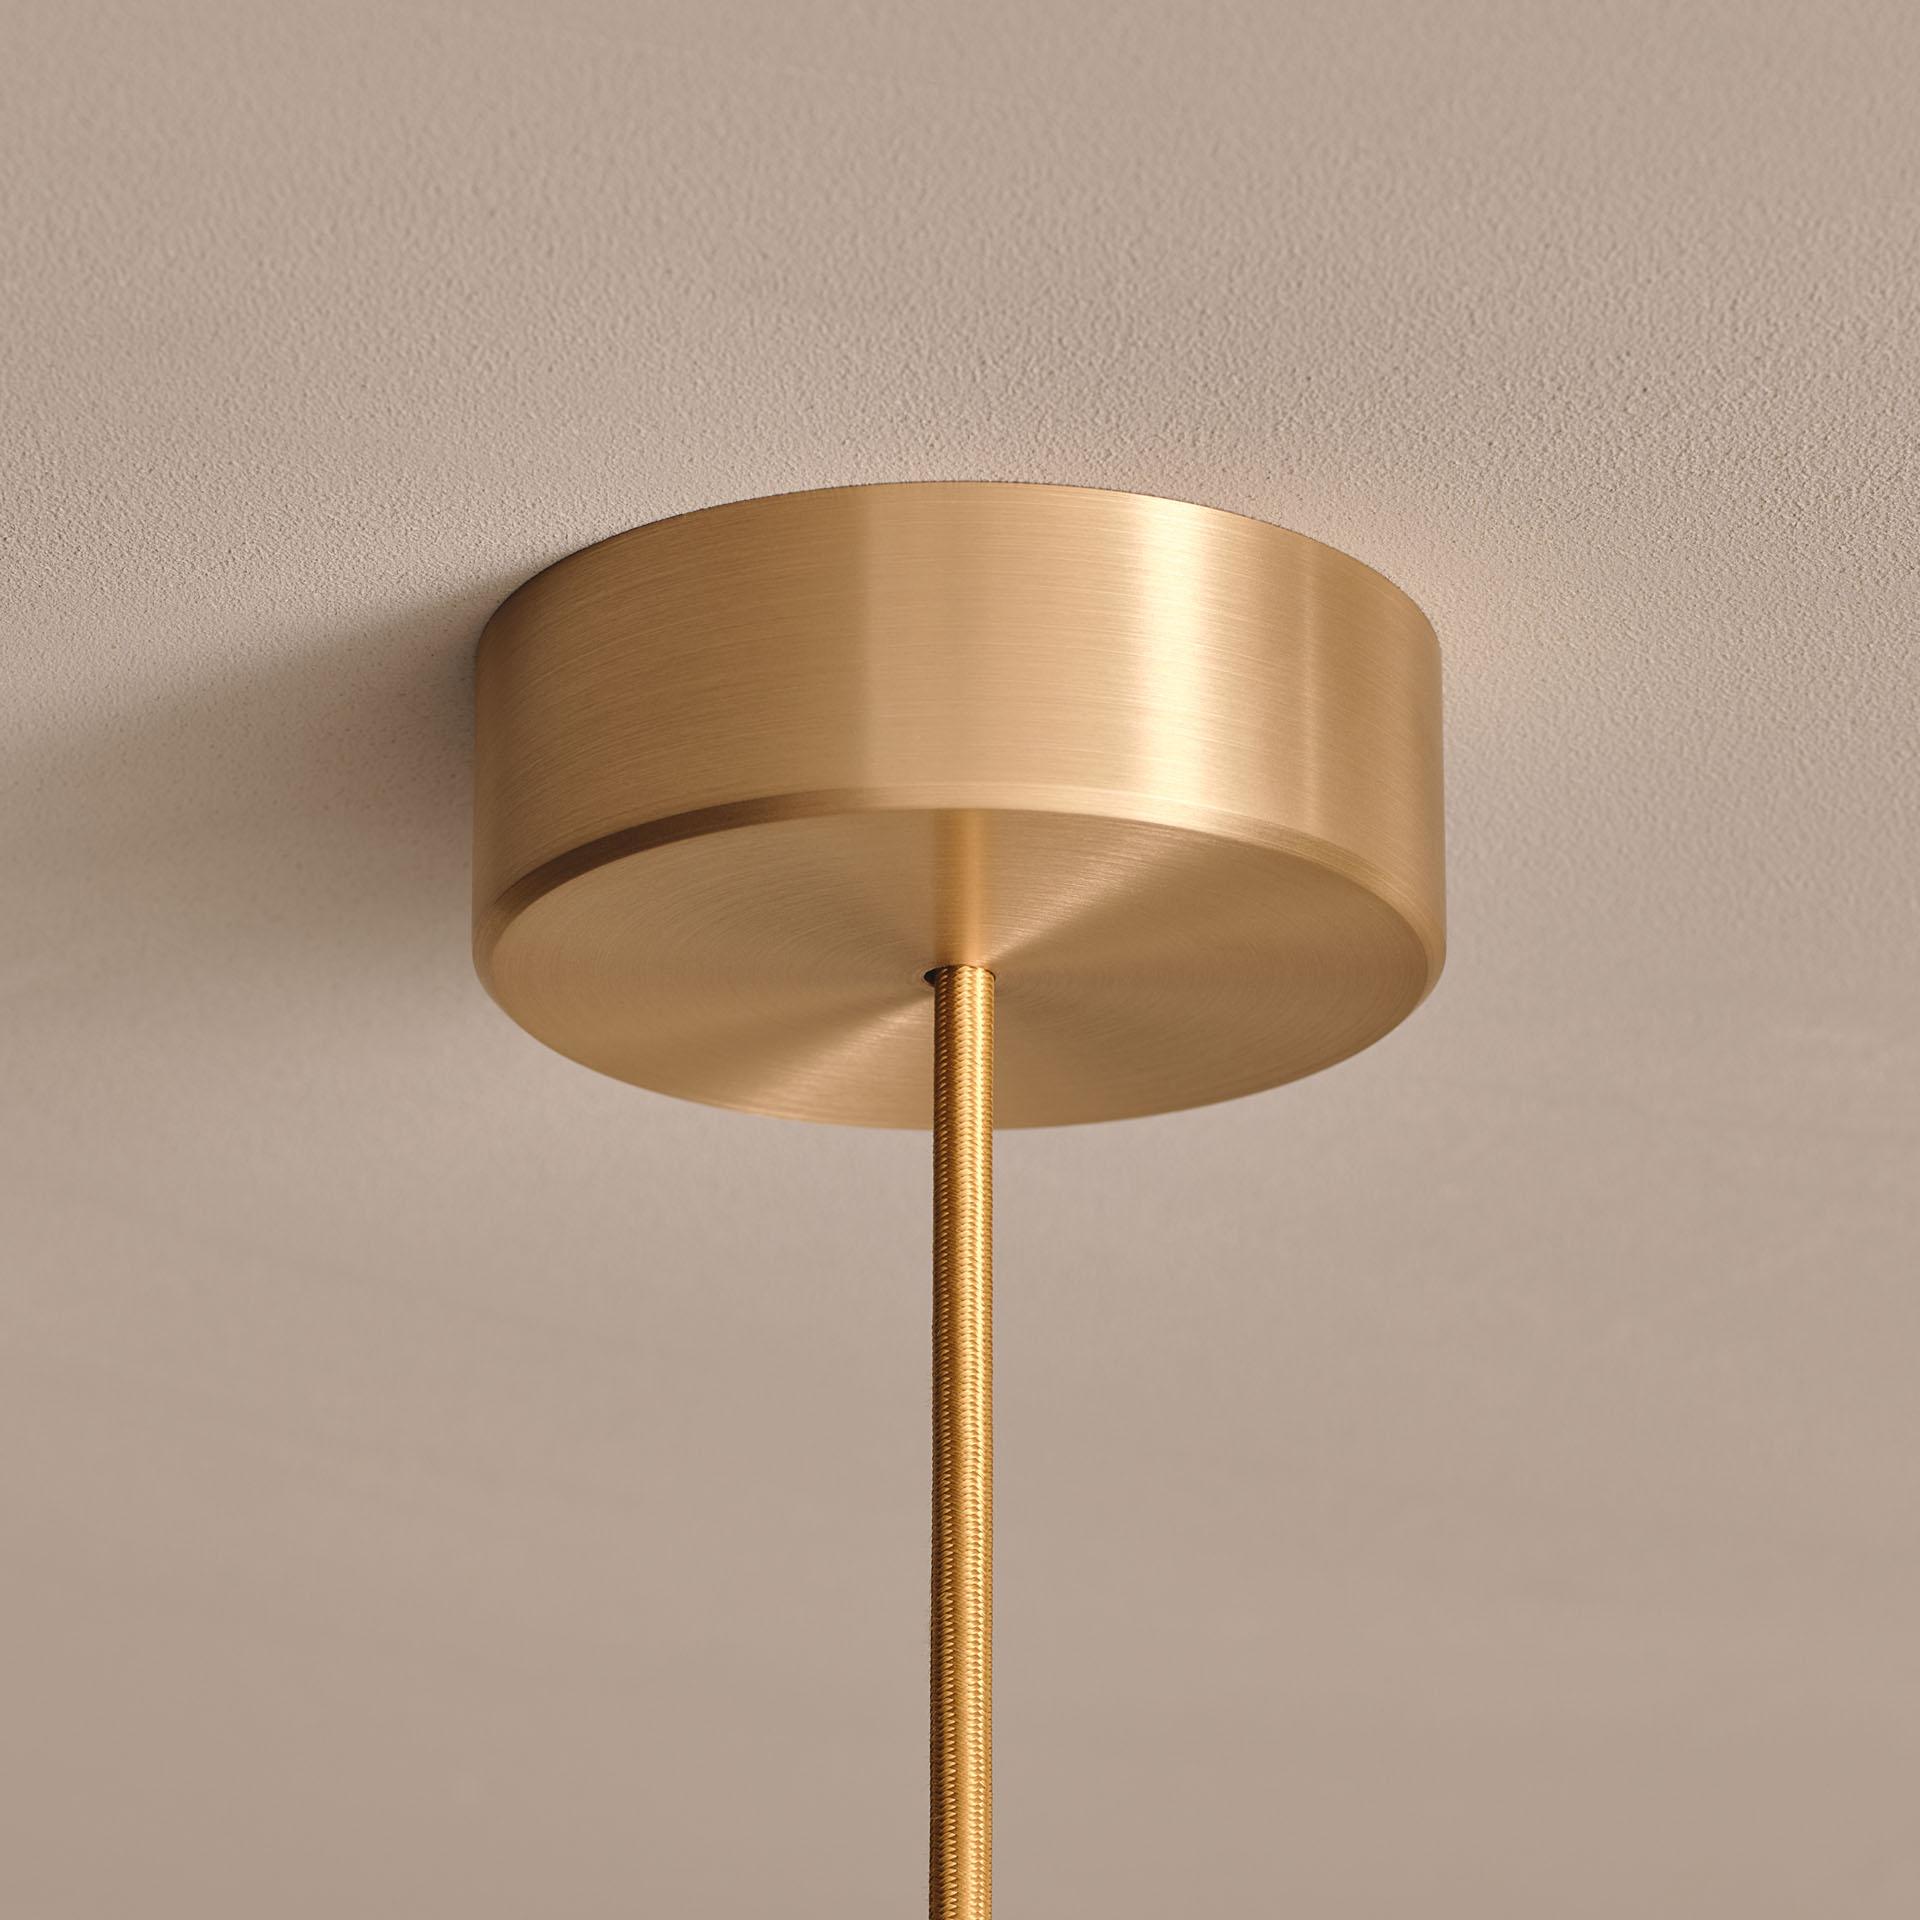 British 'Cosmic Sol Pendant 70' Handmade Satin Brass Finished Ceiling Lamp For Sale